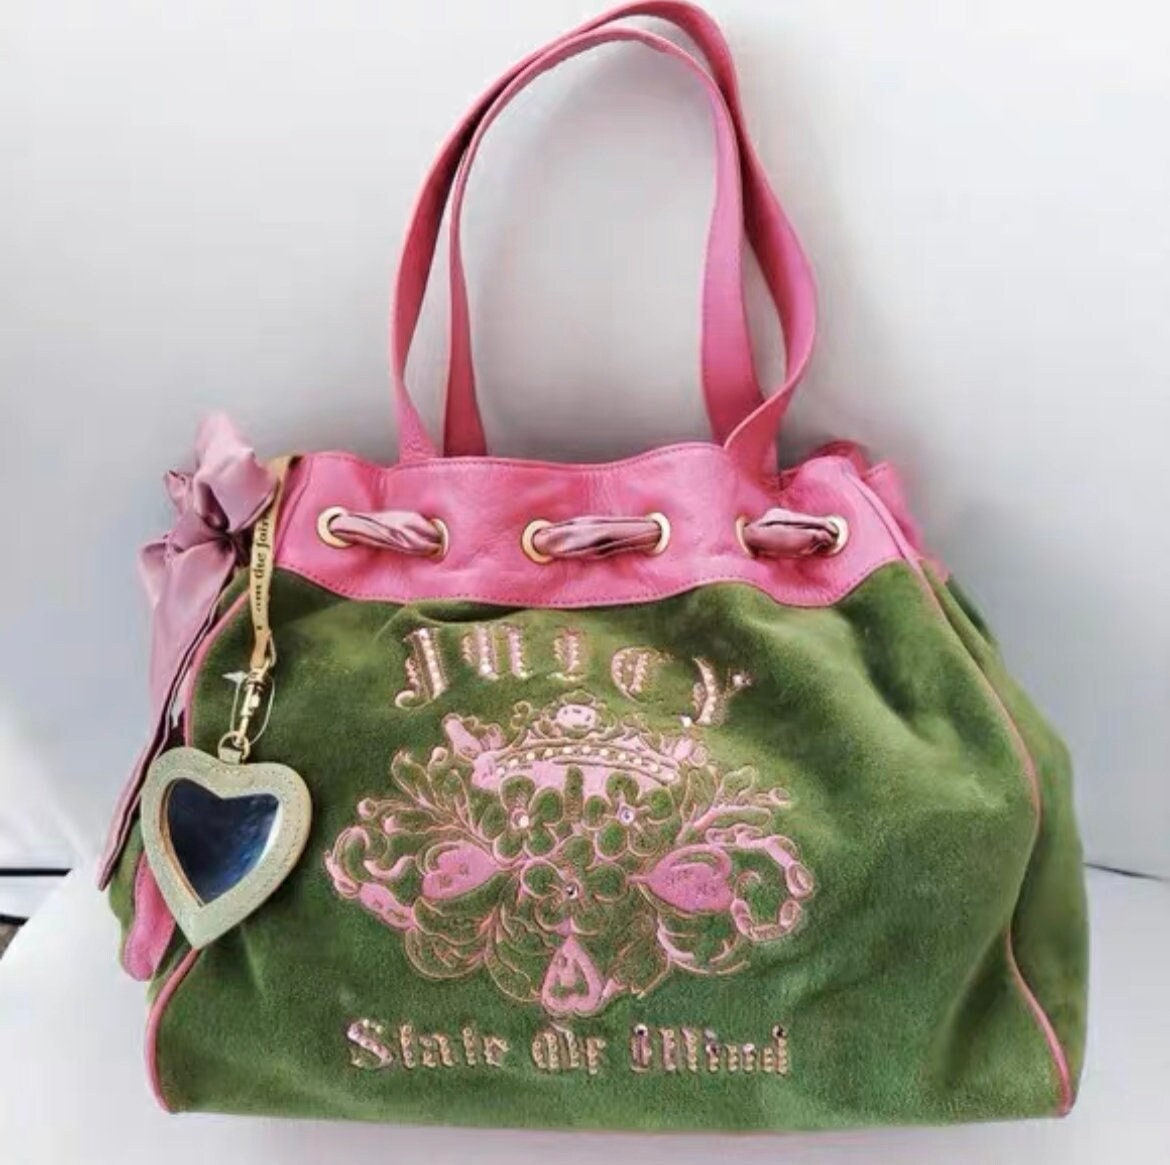 Juicy Couture Small Shoulder Bag Pink Leather Dump Him